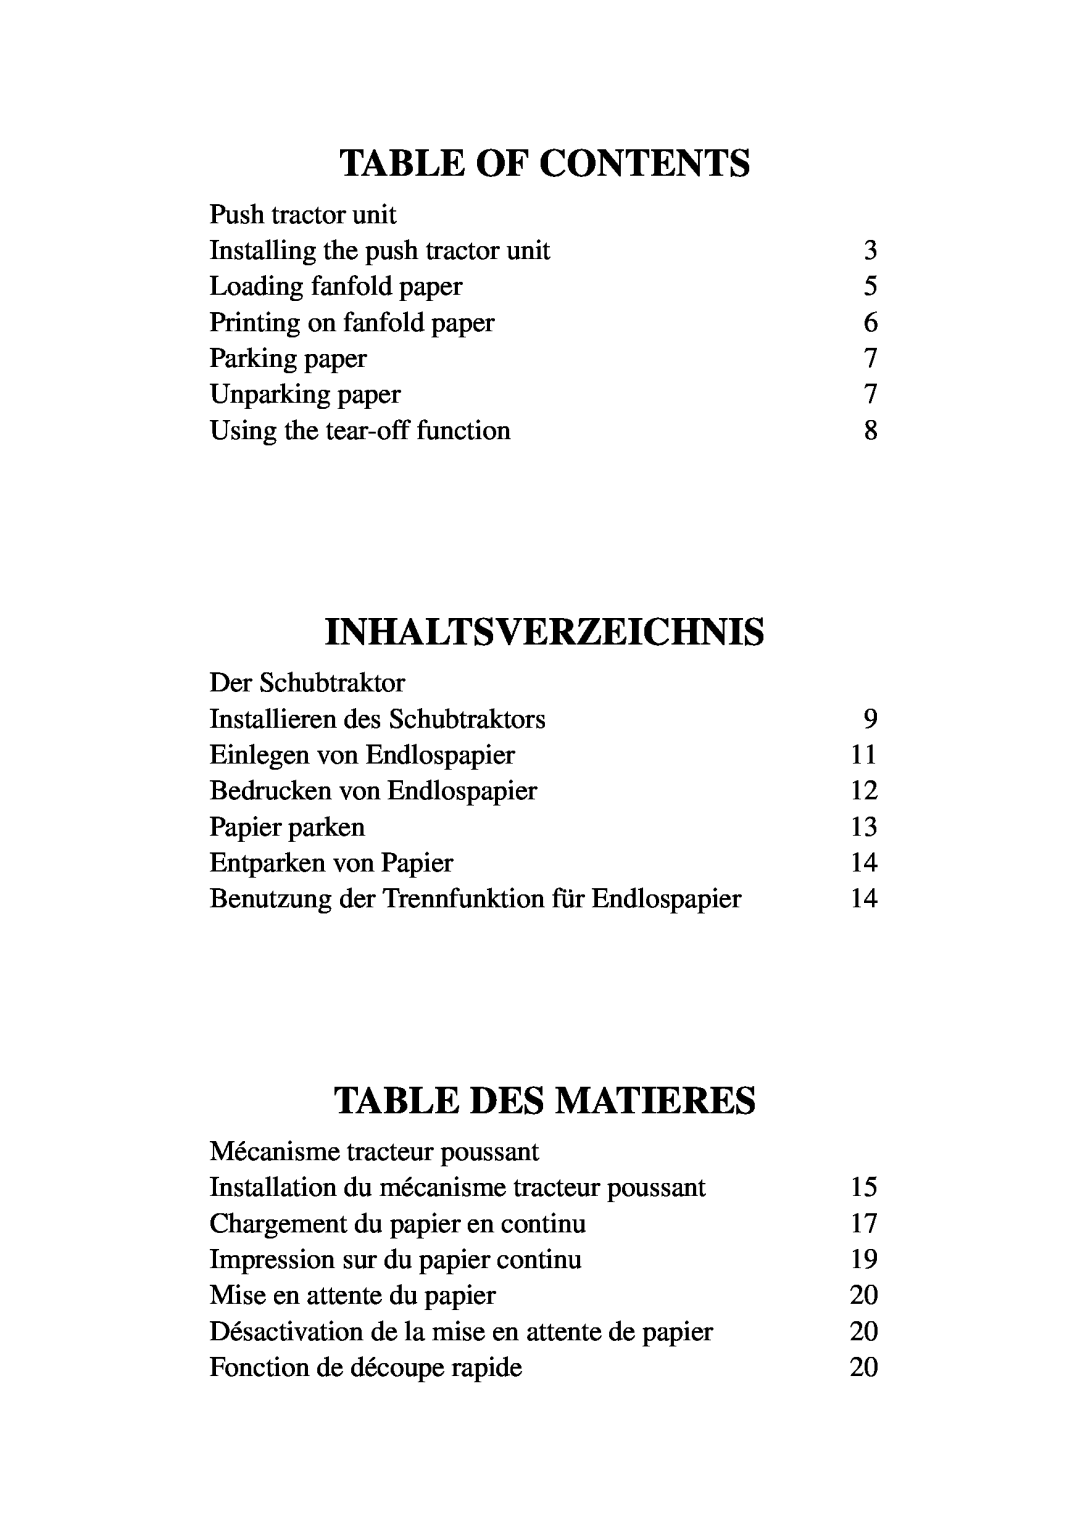 Star Micronics PT-10Q user manual Table Of Contents, Inhaltsverzeichnis, Table Des Matieres 